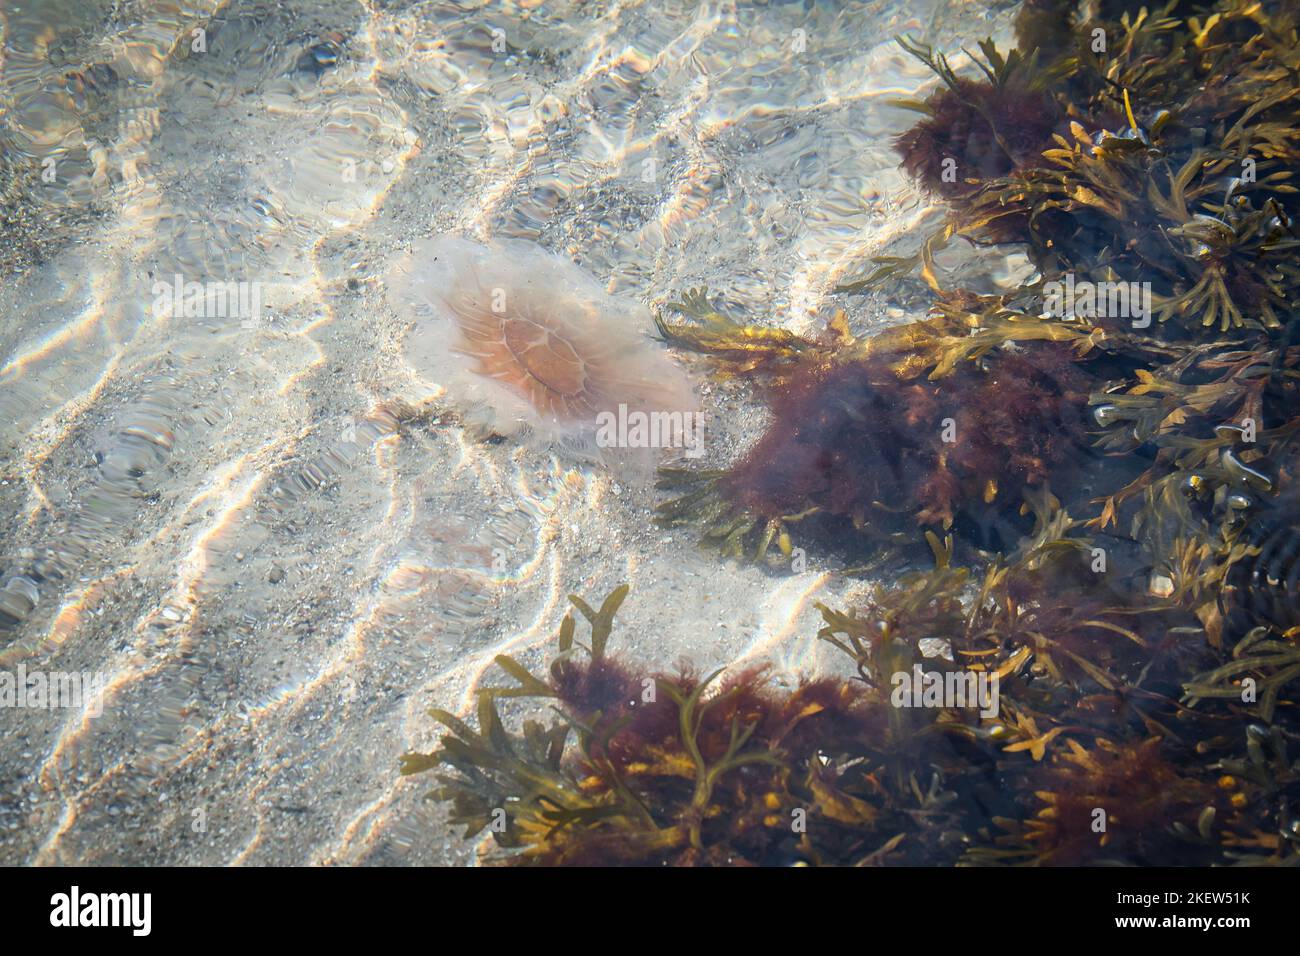 Fire jellyfish on the coast swimming in salt water. Sand in the background in waves pattern. Animal photo from nature Stock Photo